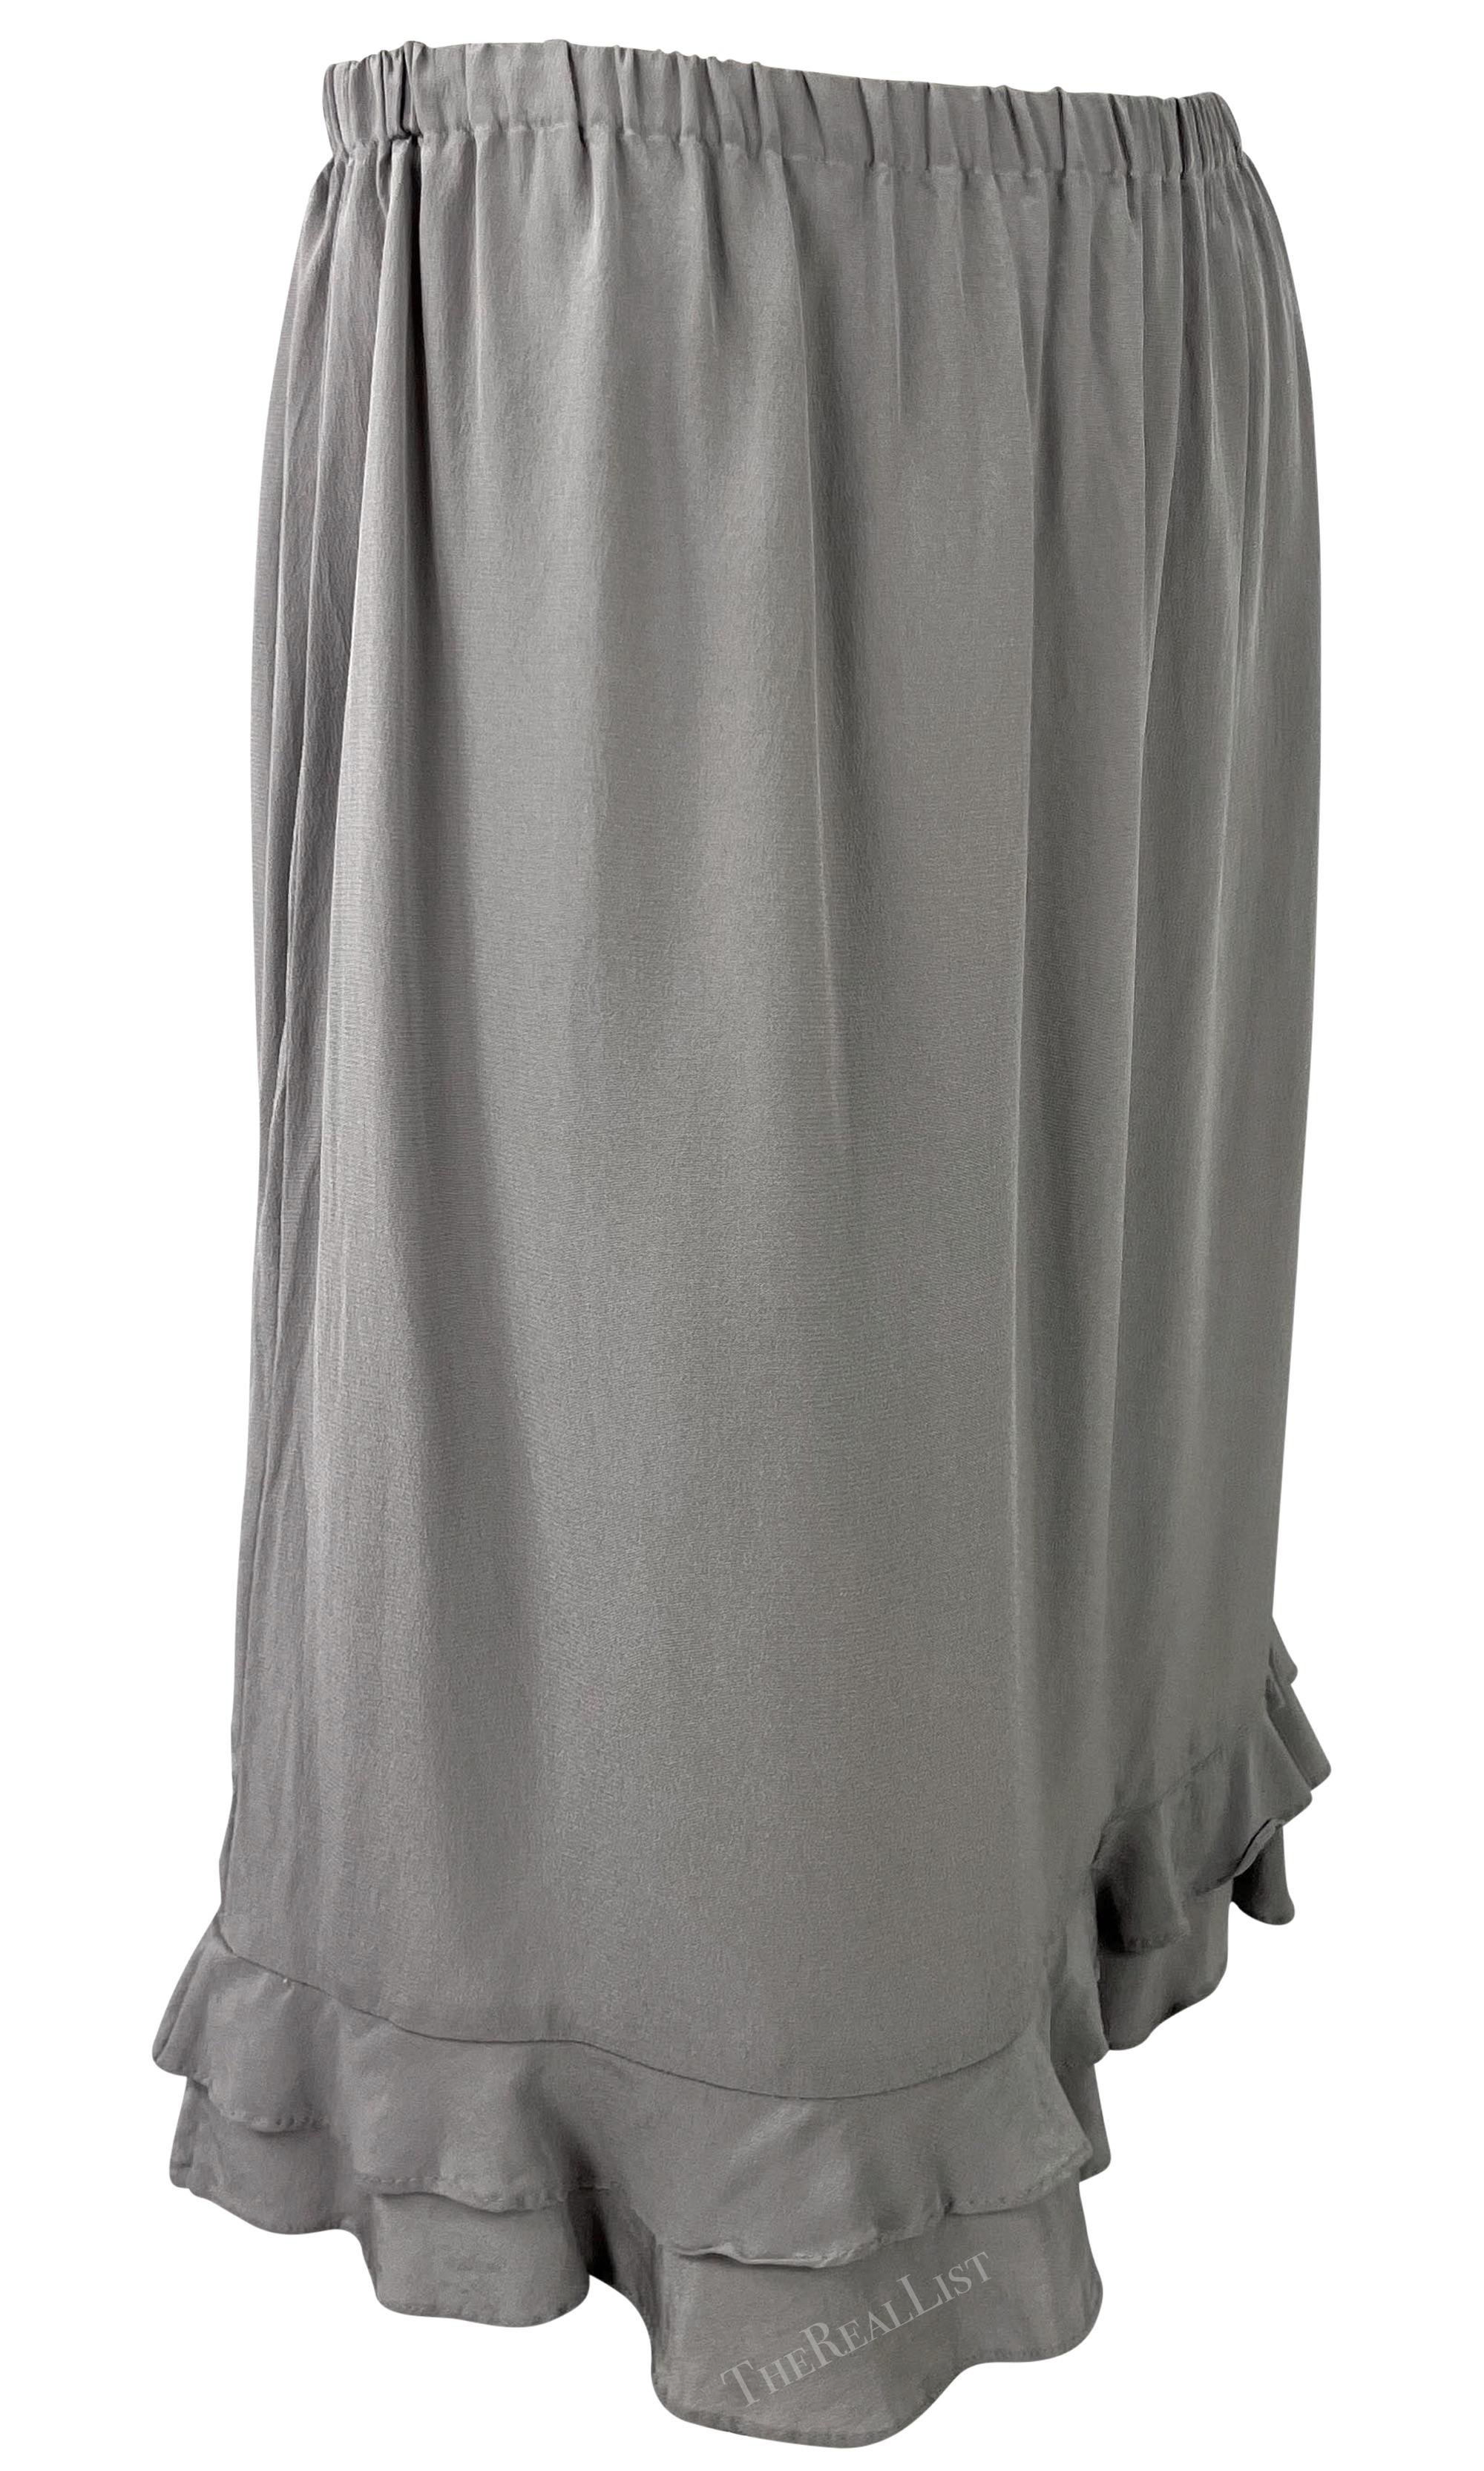 S/S 1999 Gucci by Tom Ford Ruffled Grey Silk Long Sleeve Top Skirt Set For Sale 9